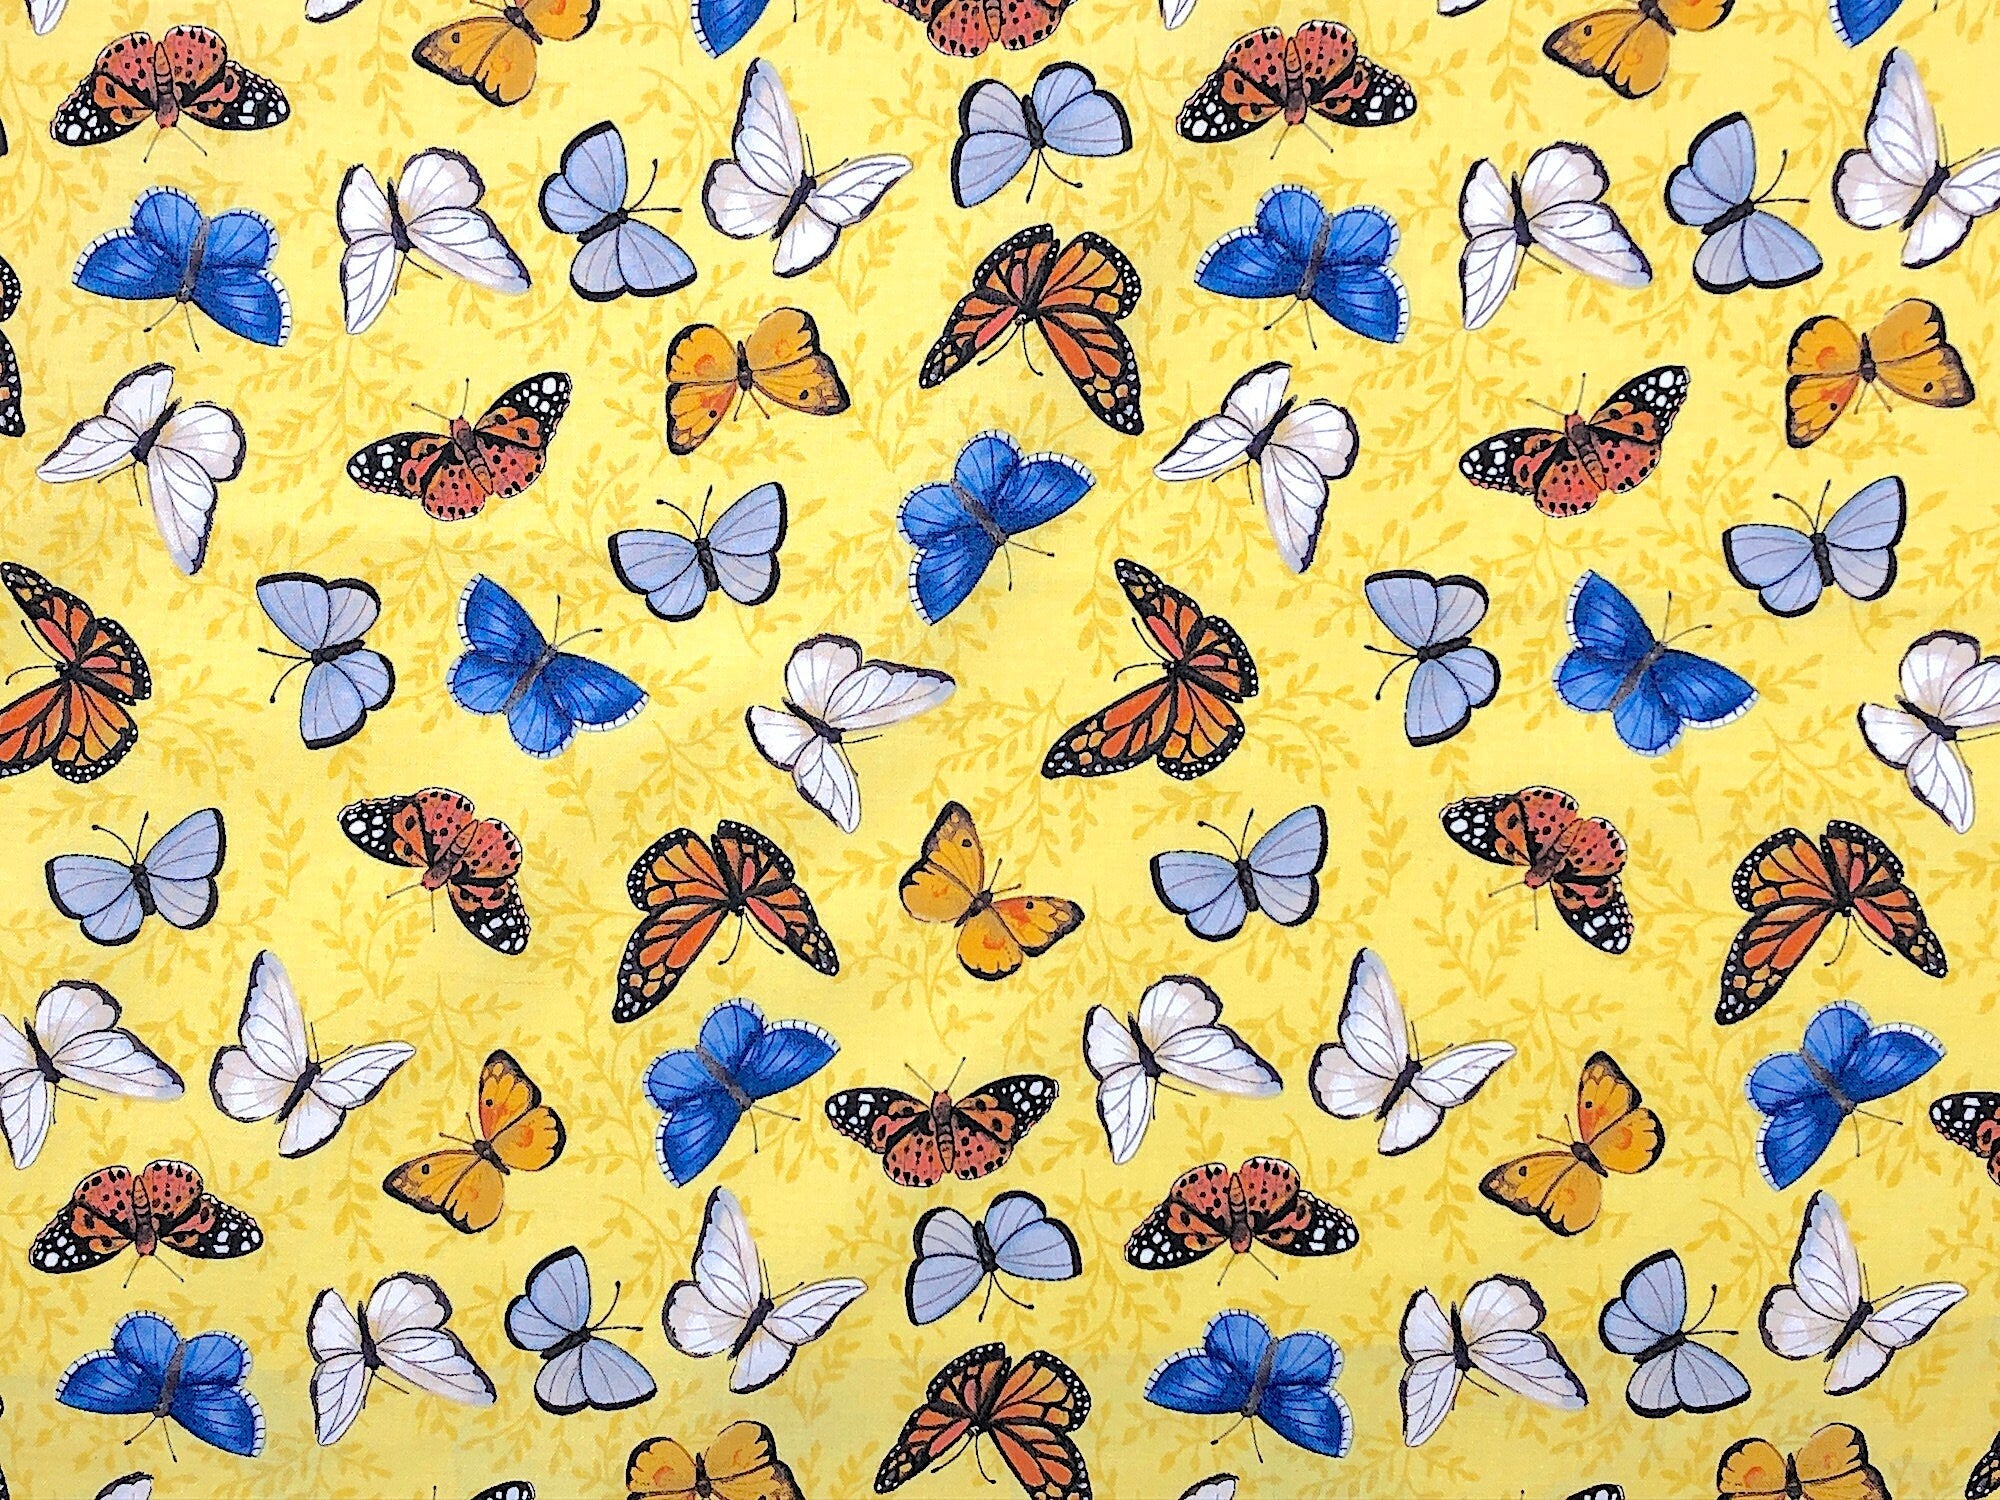 This yellow cotton fabric is covered with butterflies. The butterflies are blue, white, yellow and orange. This fabric is part of the Sunny Fields collection.